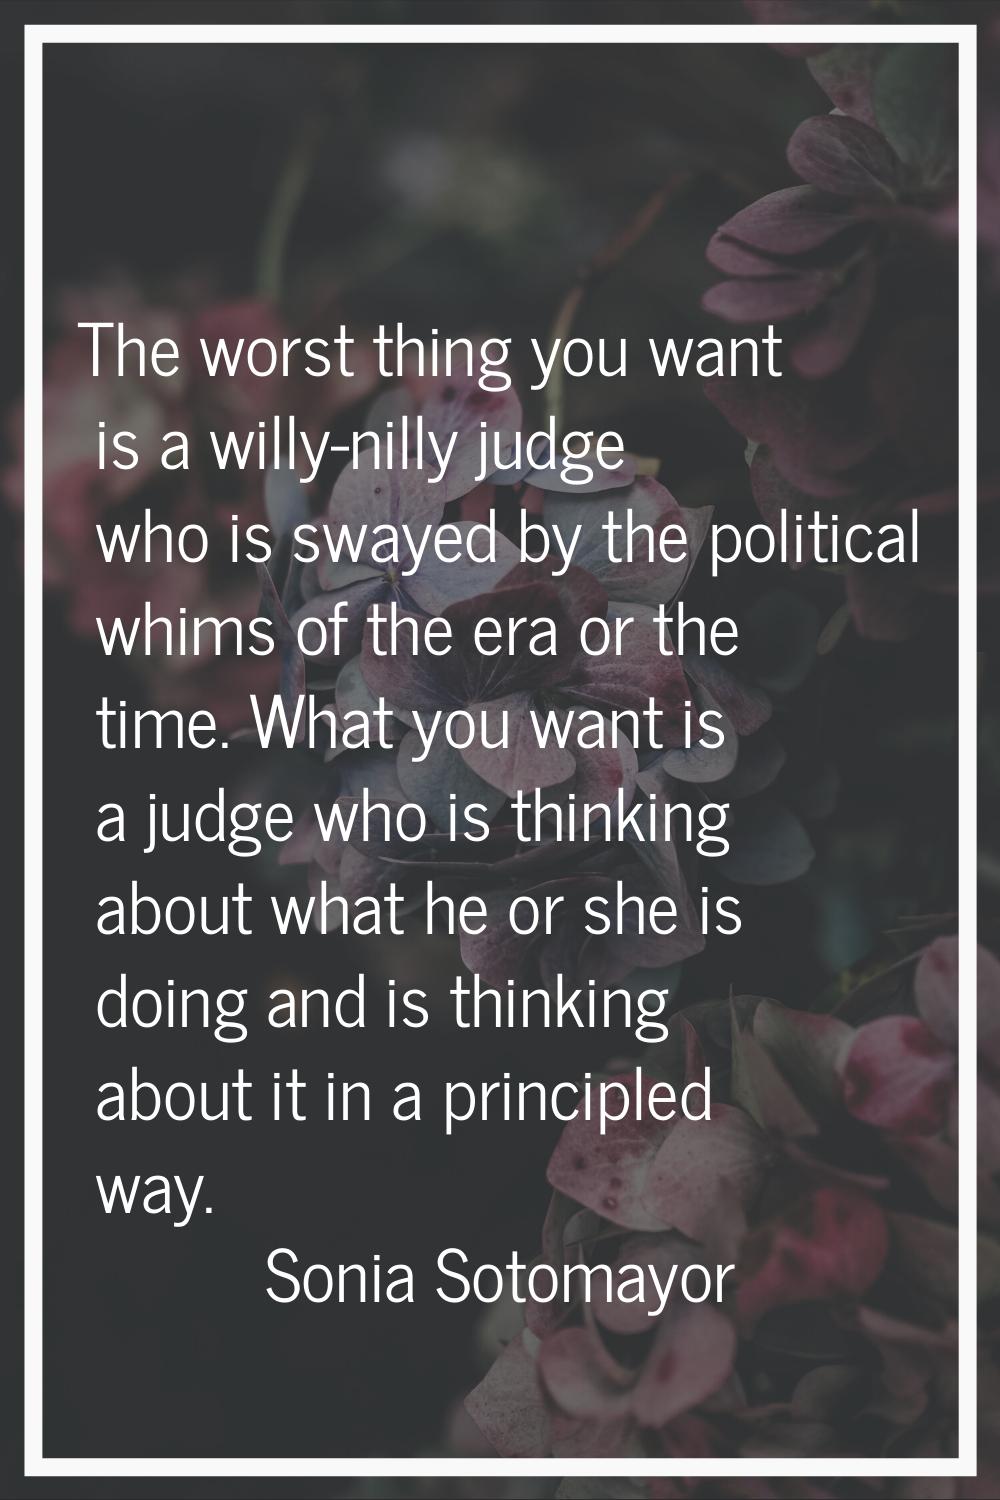 The worst thing you want is a willy-nilly judge who is swayed by the political whims of the era or 